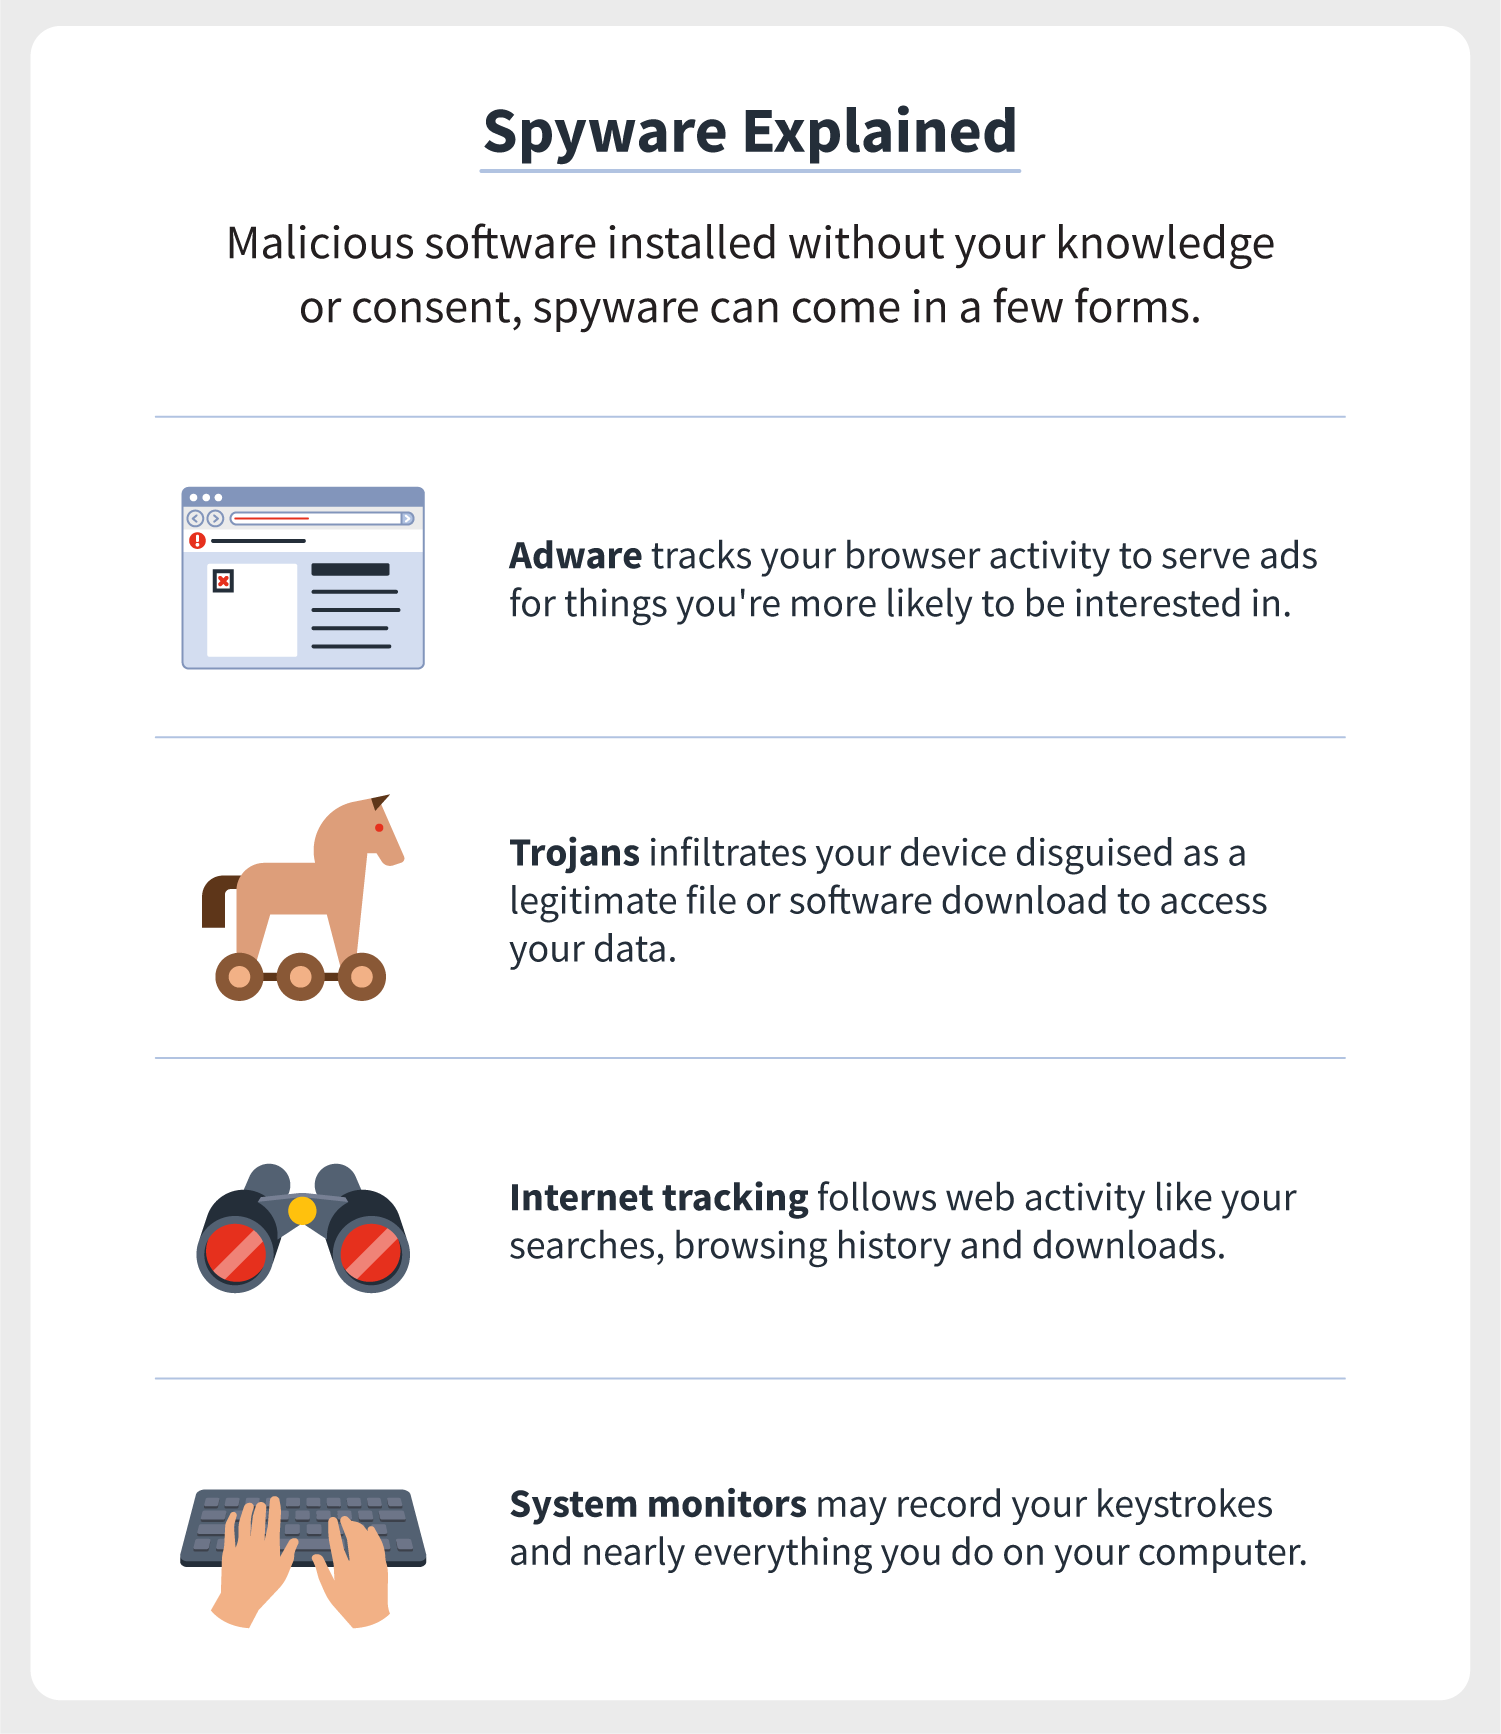 A spyware definition is followed by illustrations and text describing four types of spyware: adware, trojans, internet tracking, and system monitors.